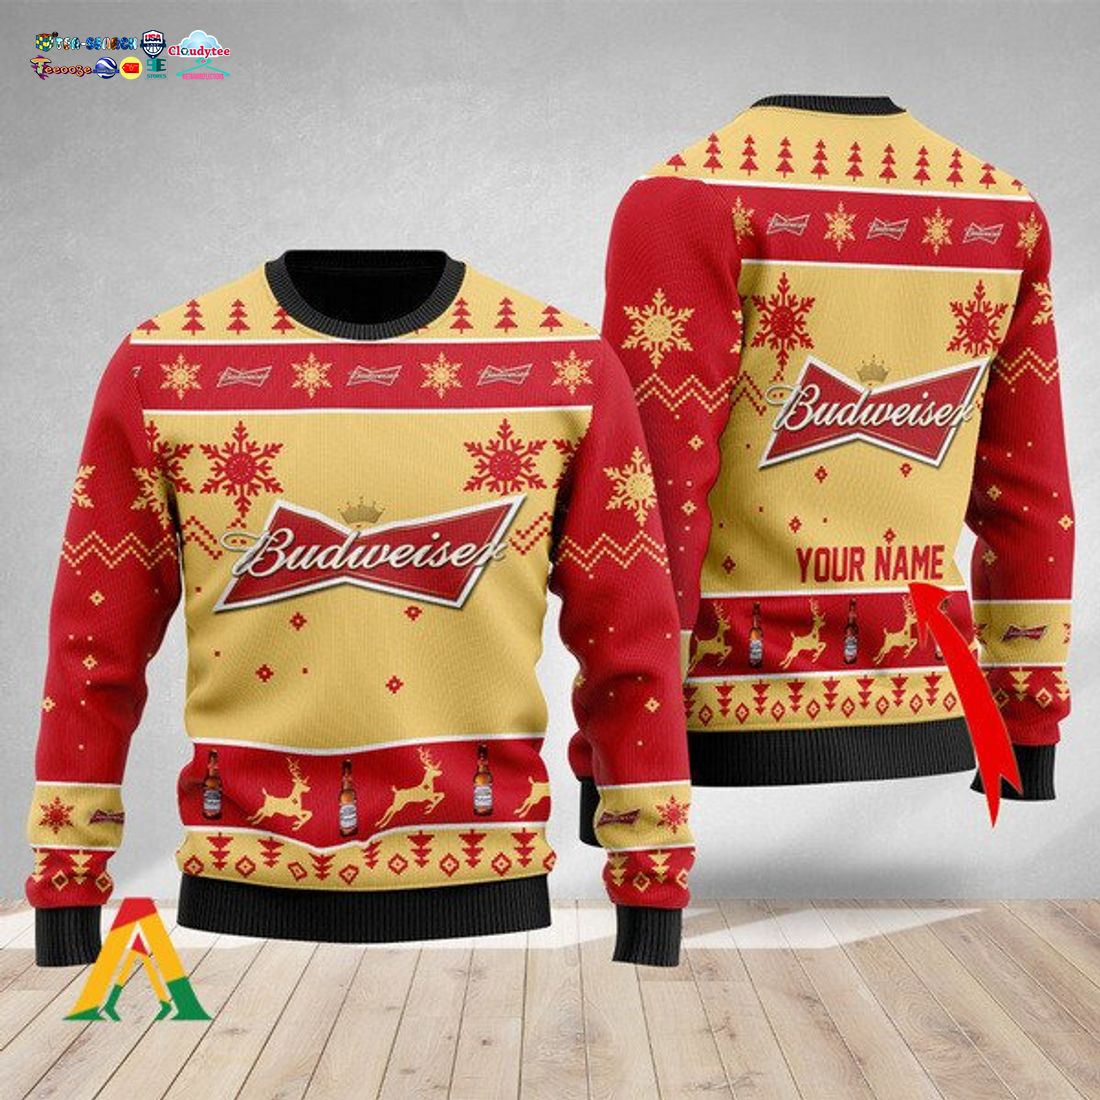 personalized-name-budweiser-ver-1-ugly-christmas-sweater-1-a2avD.jpg